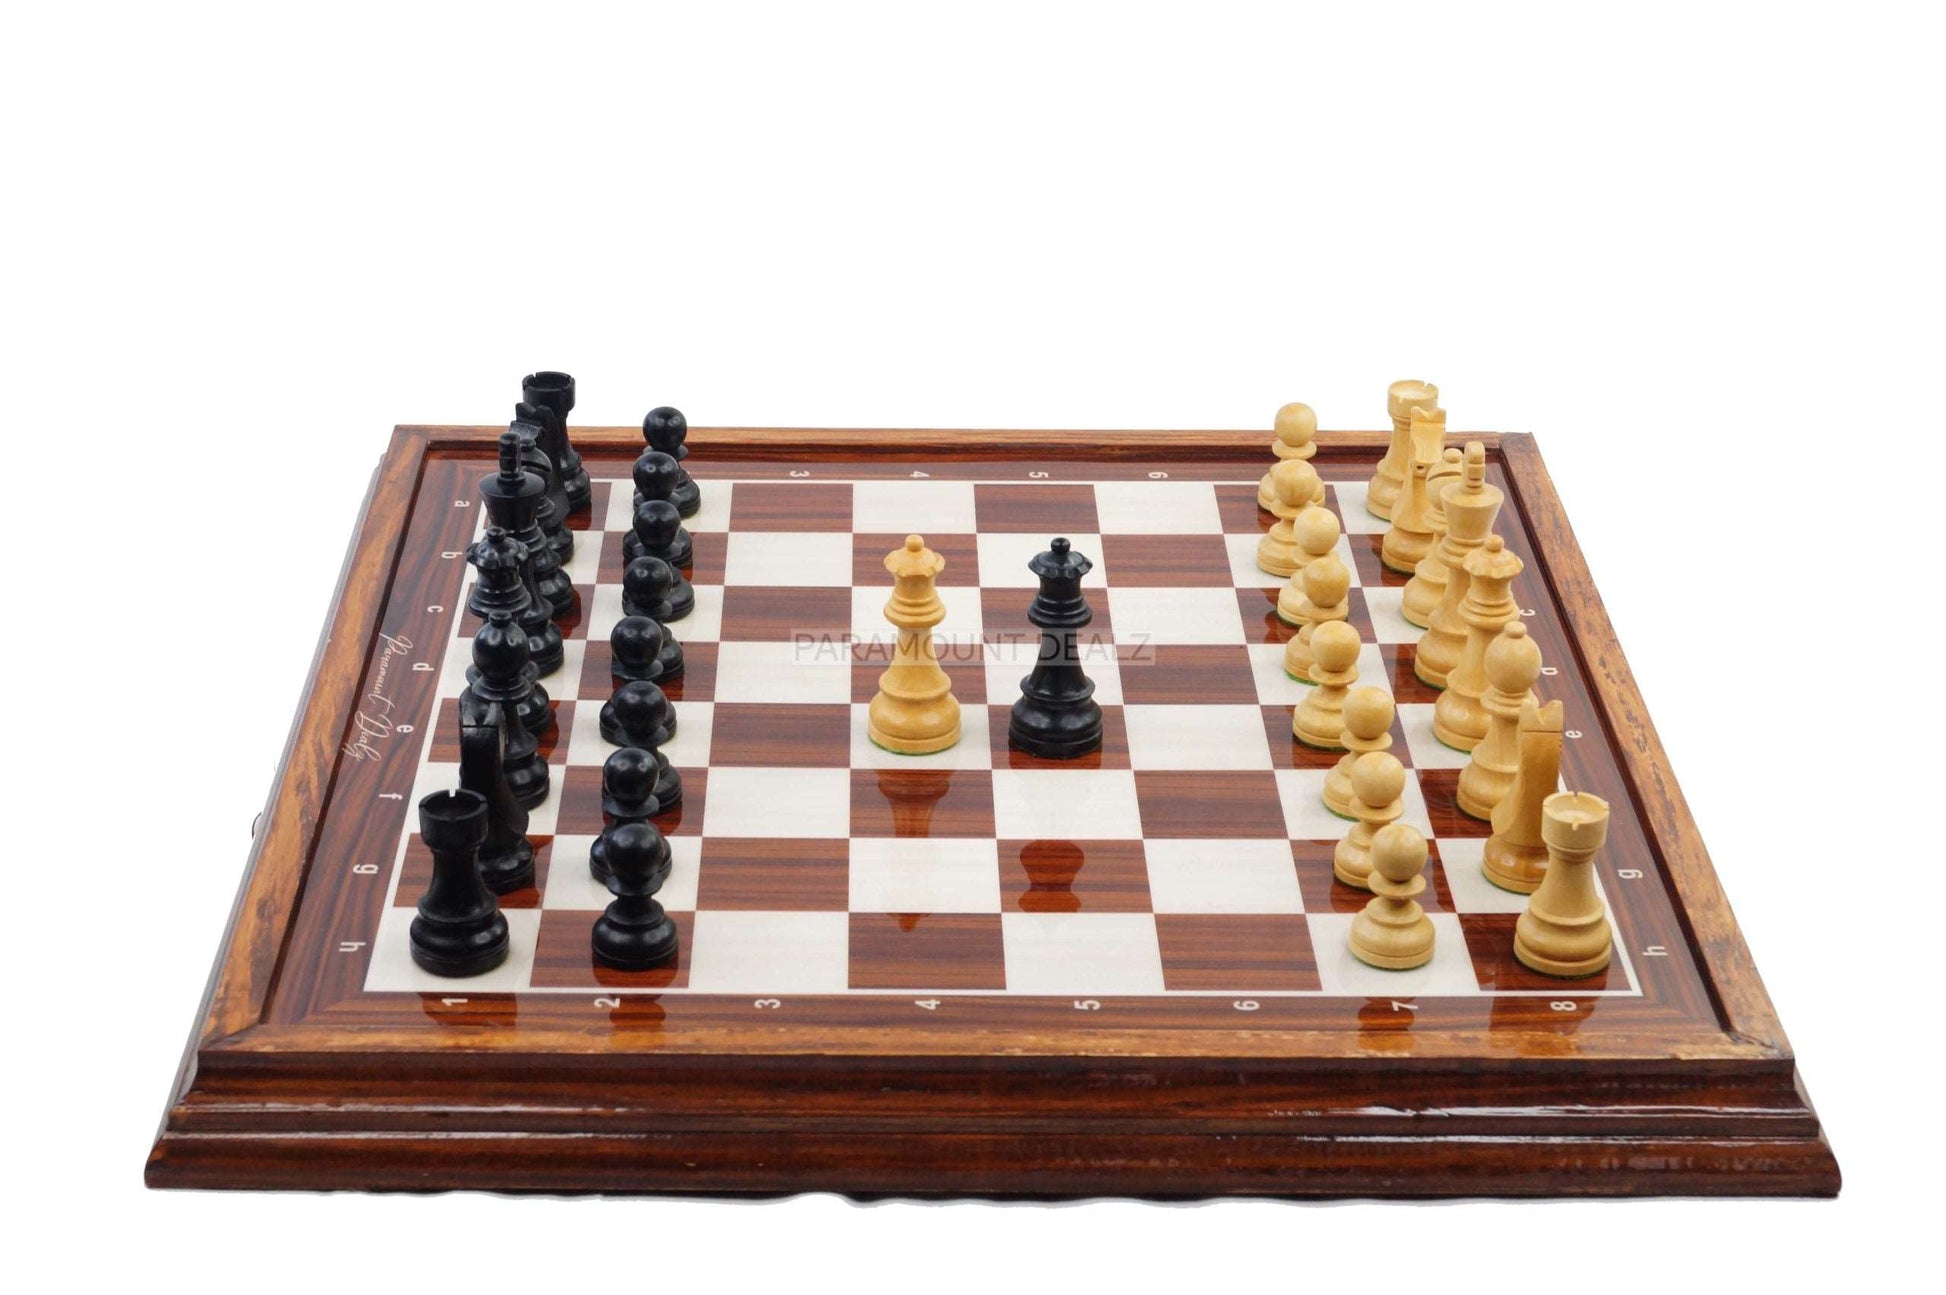 DRAGON SERIES WOODEN LUXURIOUS CHESS LAMINATED BOARD (WITH SOLID WOODEN FRAME) & WOODEN CHESS PIECES